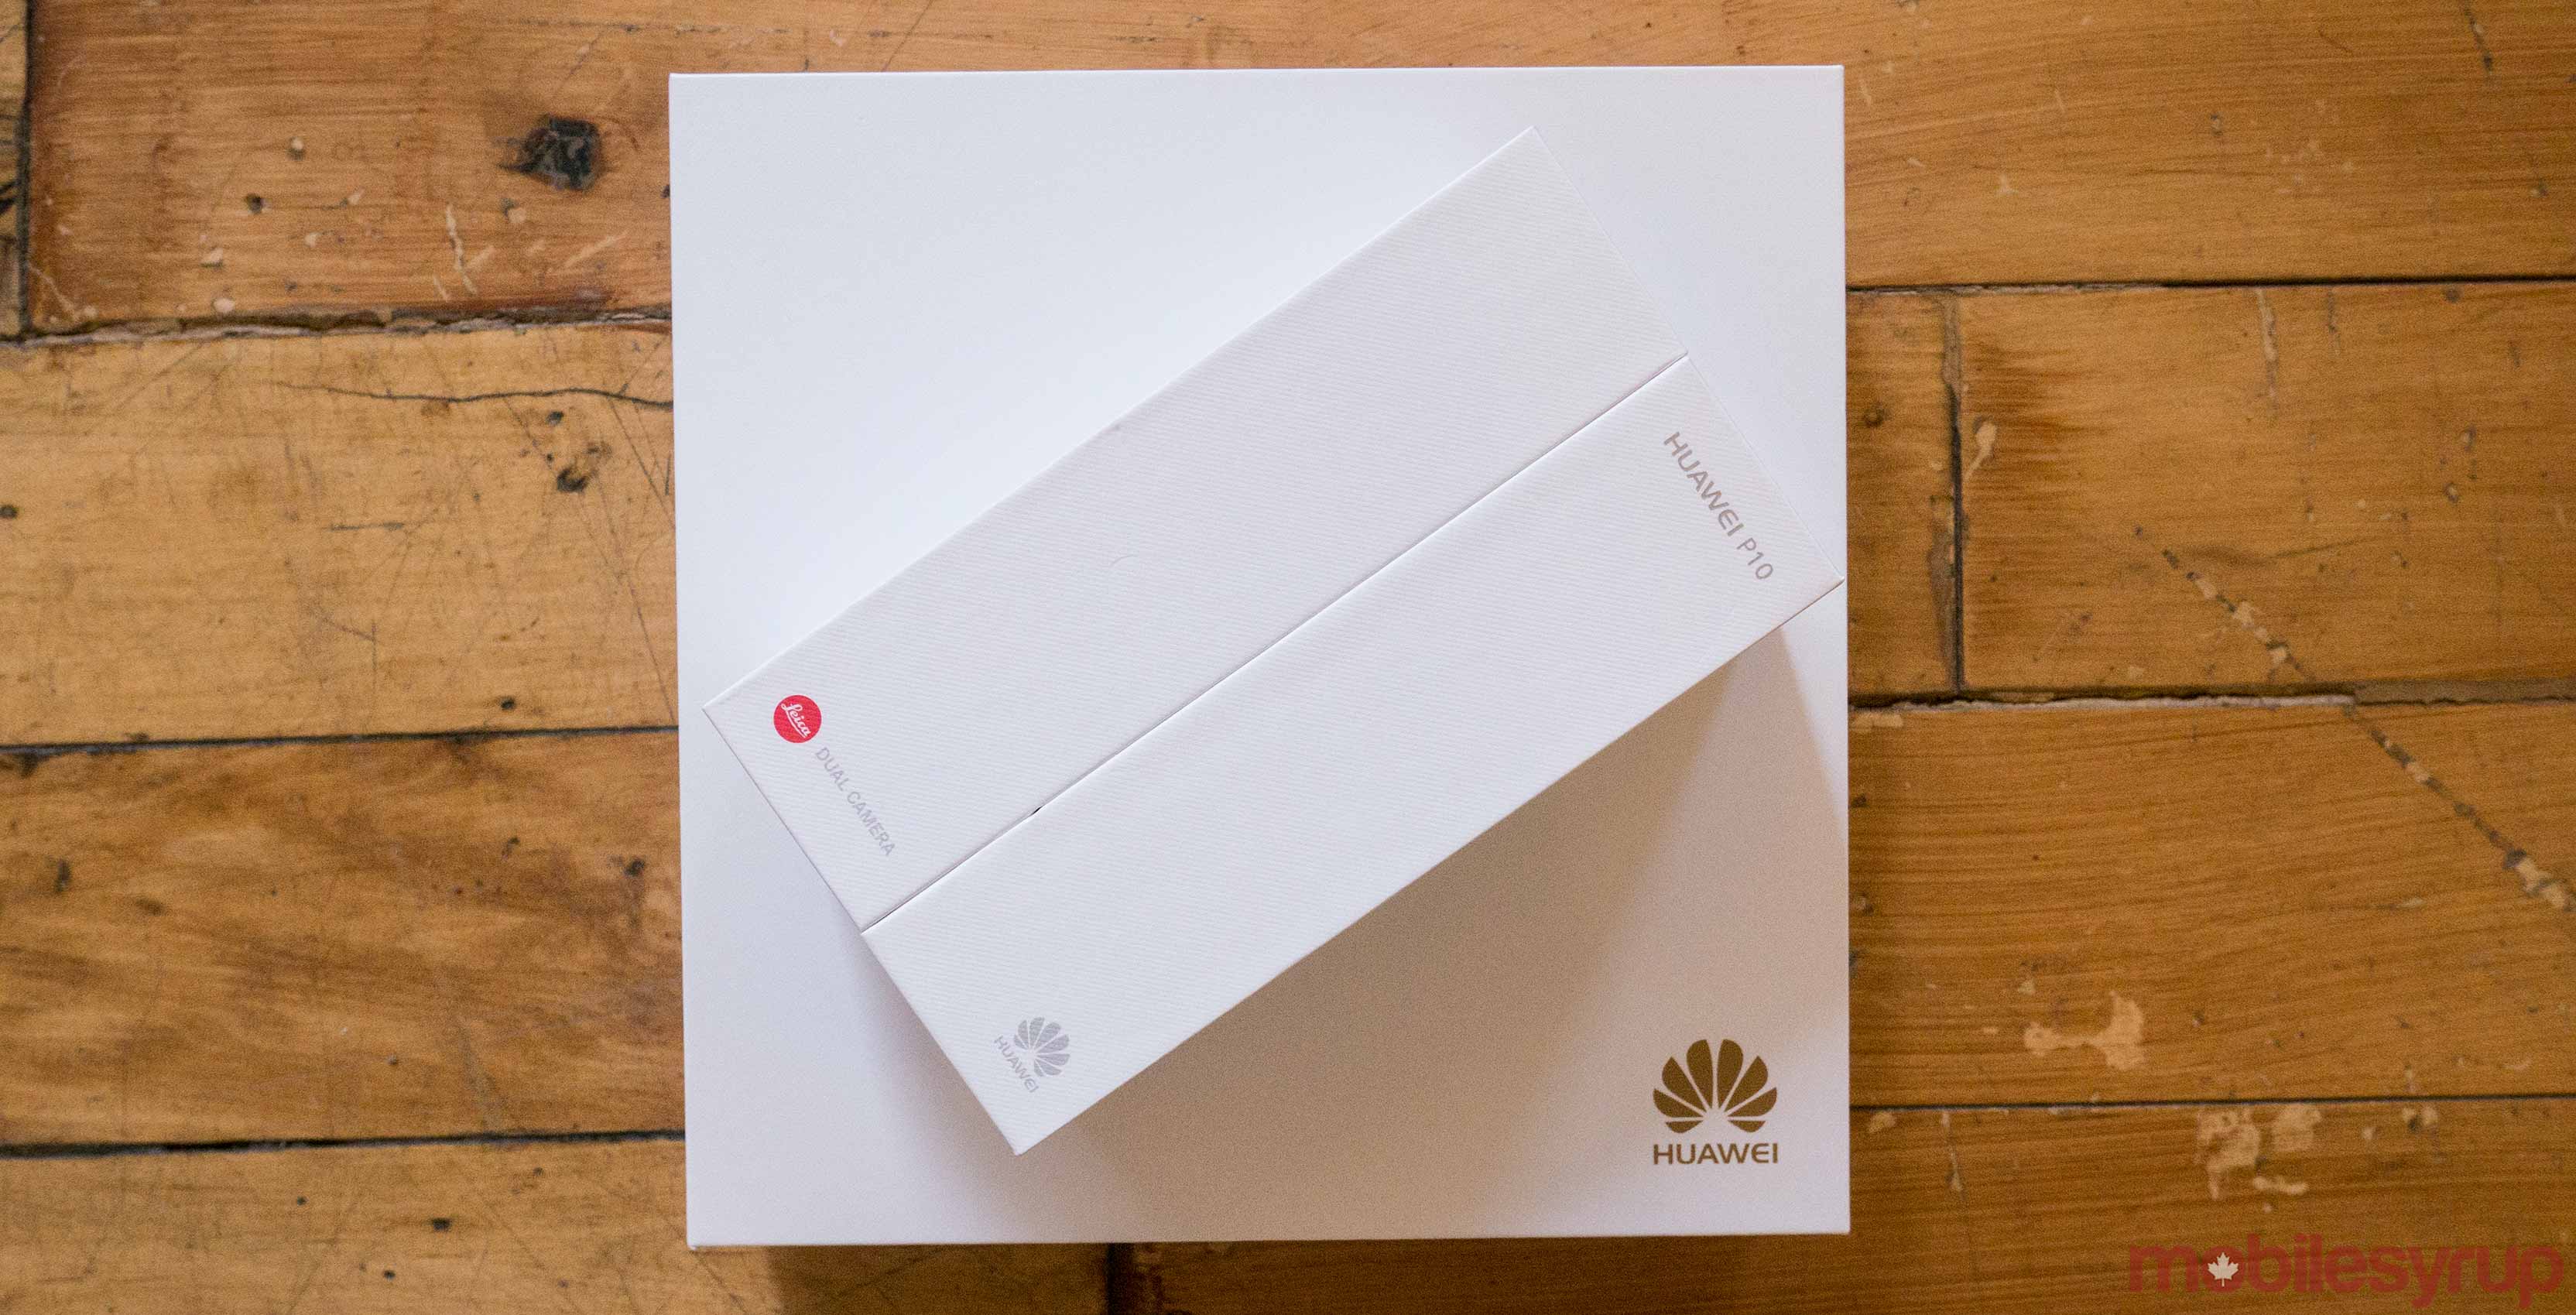 Huawei P10 smartphone on table